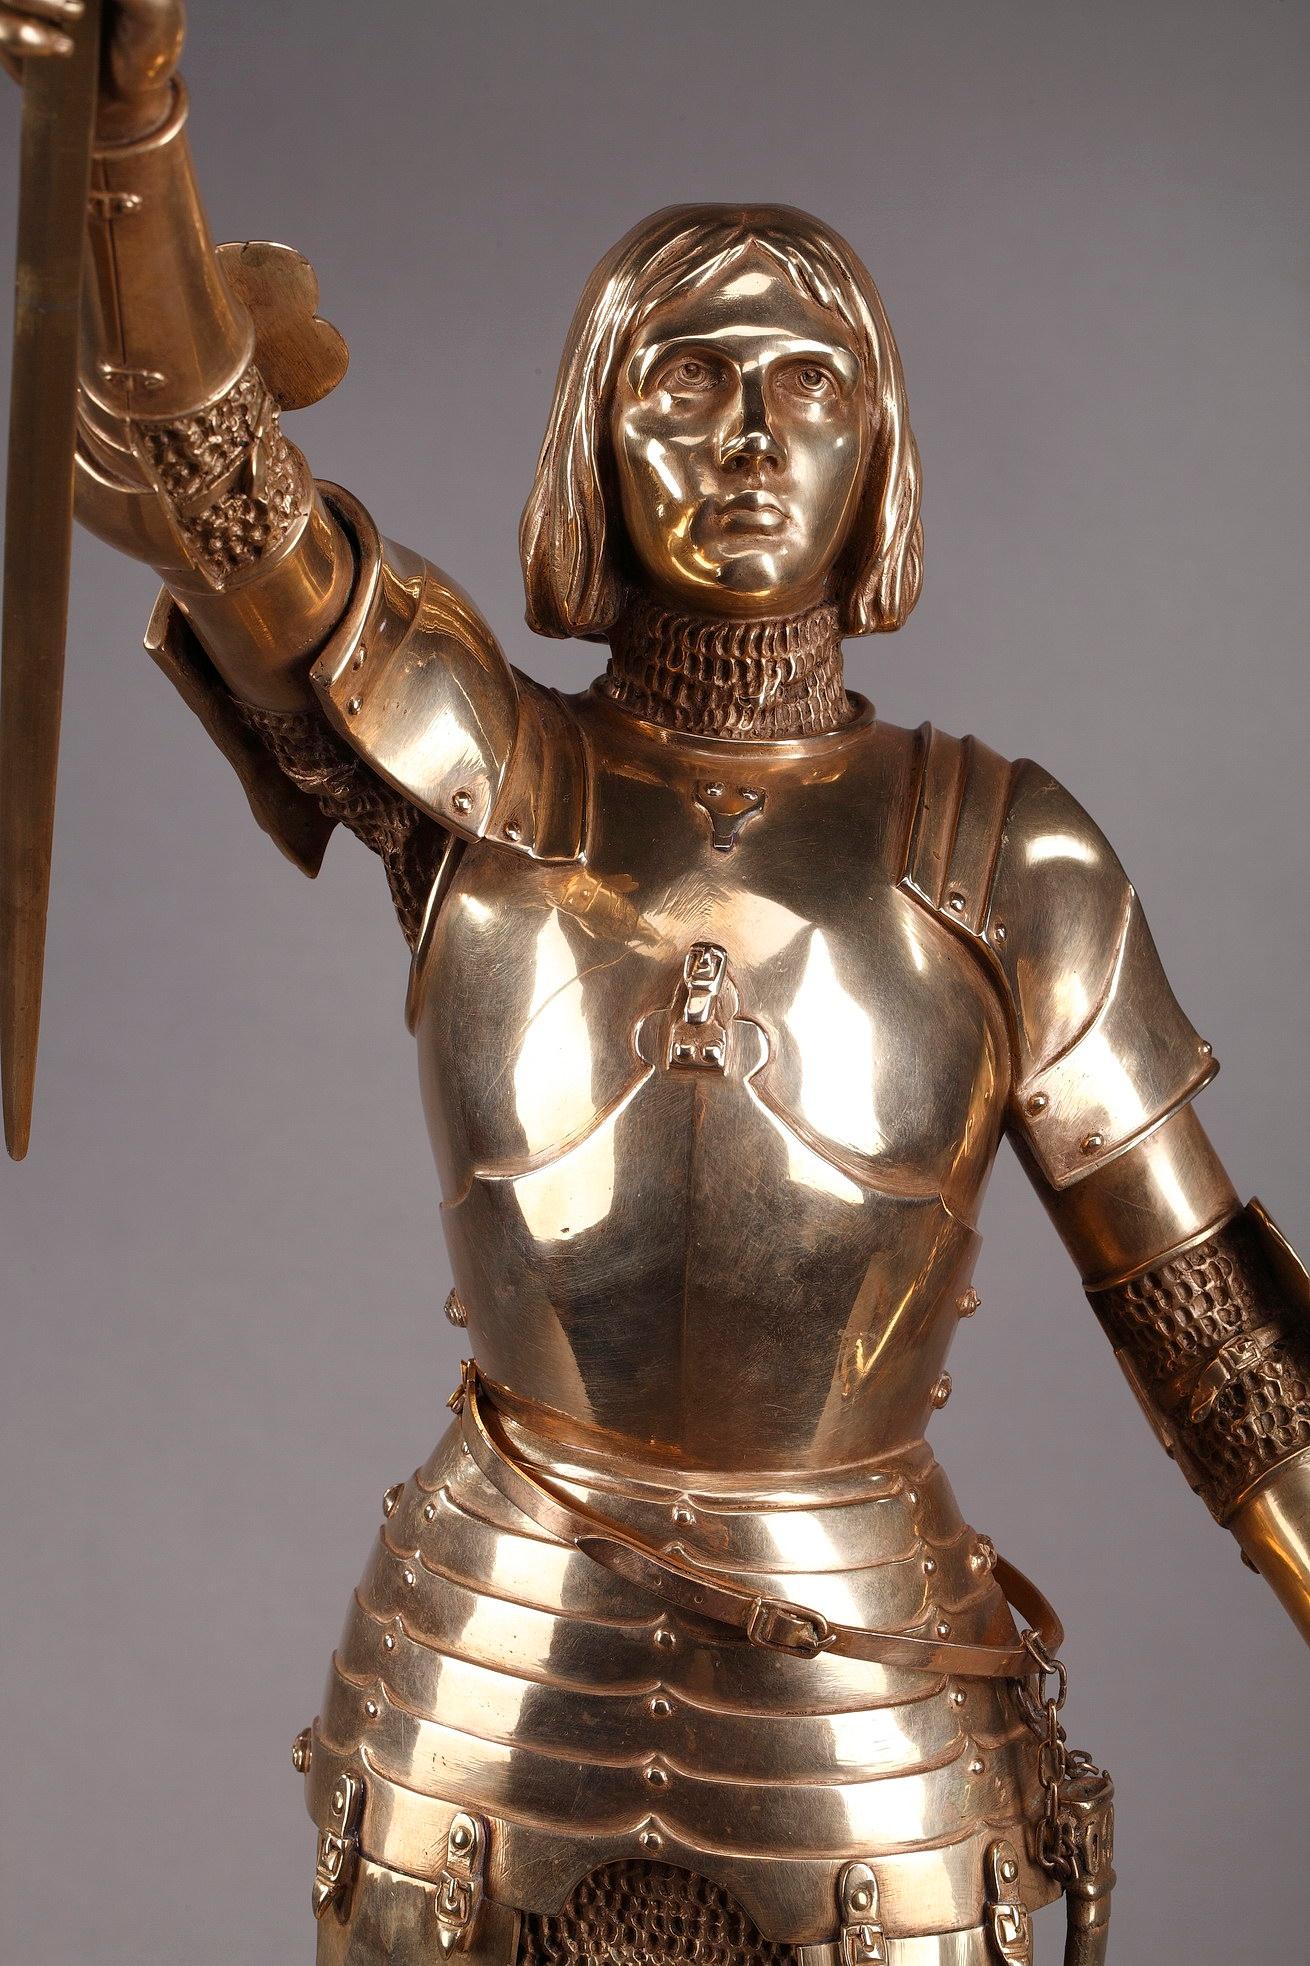 Art Deco statue crafted in gilt bronze featuring Joan of Arc by Gustave Poitvin. Joan of Arc or Jeanne d'Arc (1412-1431), nicknamed The Maid of Orléans, is a historical figure and heroine of France for her role during the Hundrer Years' War